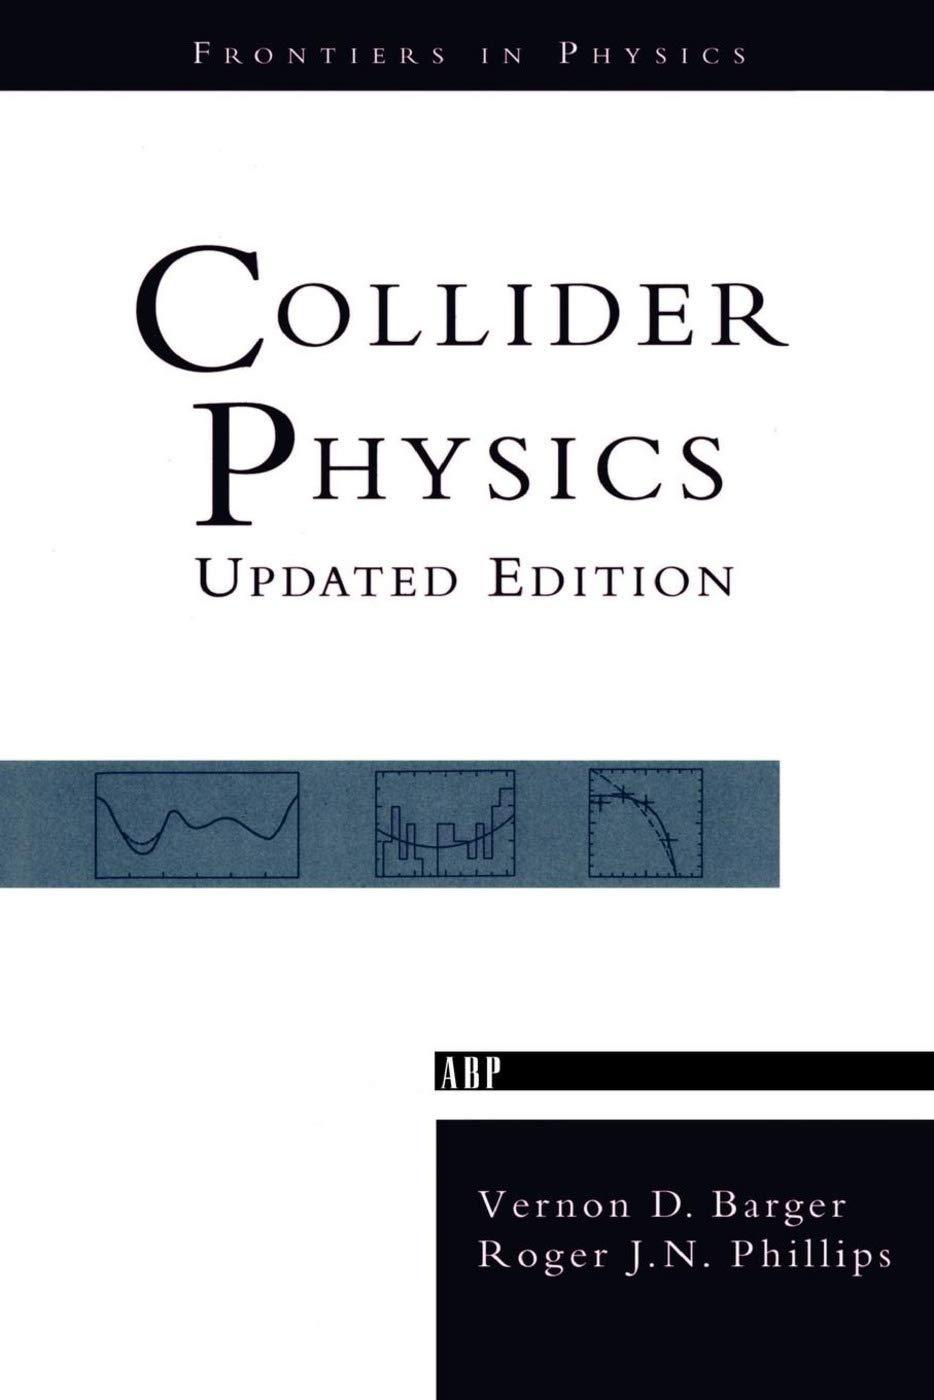 collider physics 1st edition vernon d. barger 0201149451, 978-0201149456